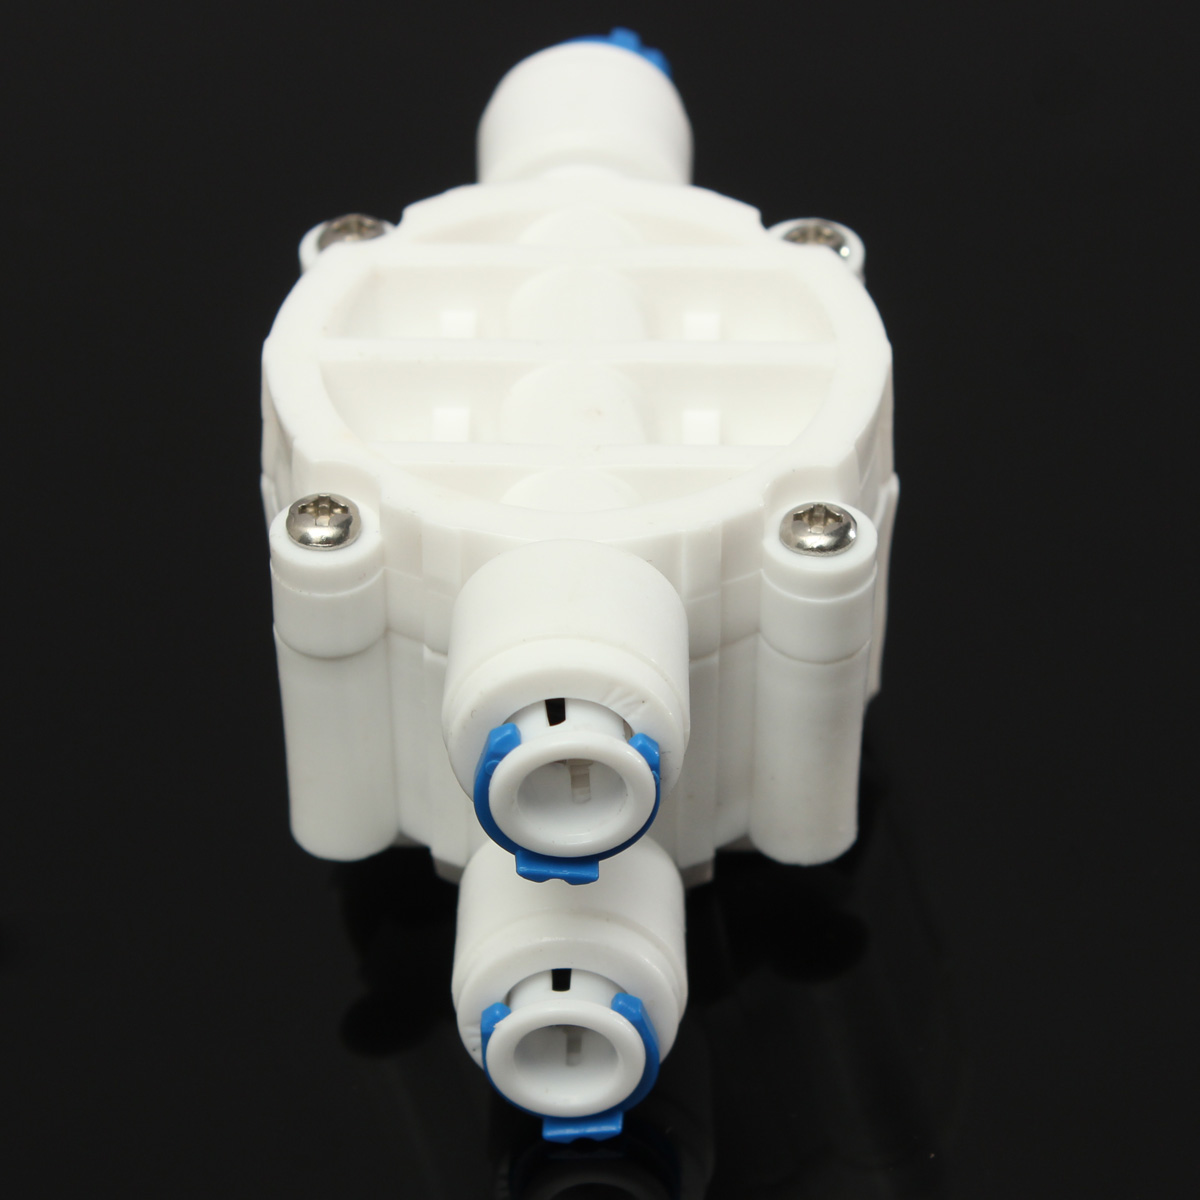 1/4" Port 4 Way Auto Shut Off Valve For RO Reverse Osmosis Water Filter System 7.5x4.1x3.7cm Automatically Shuts Off/Open